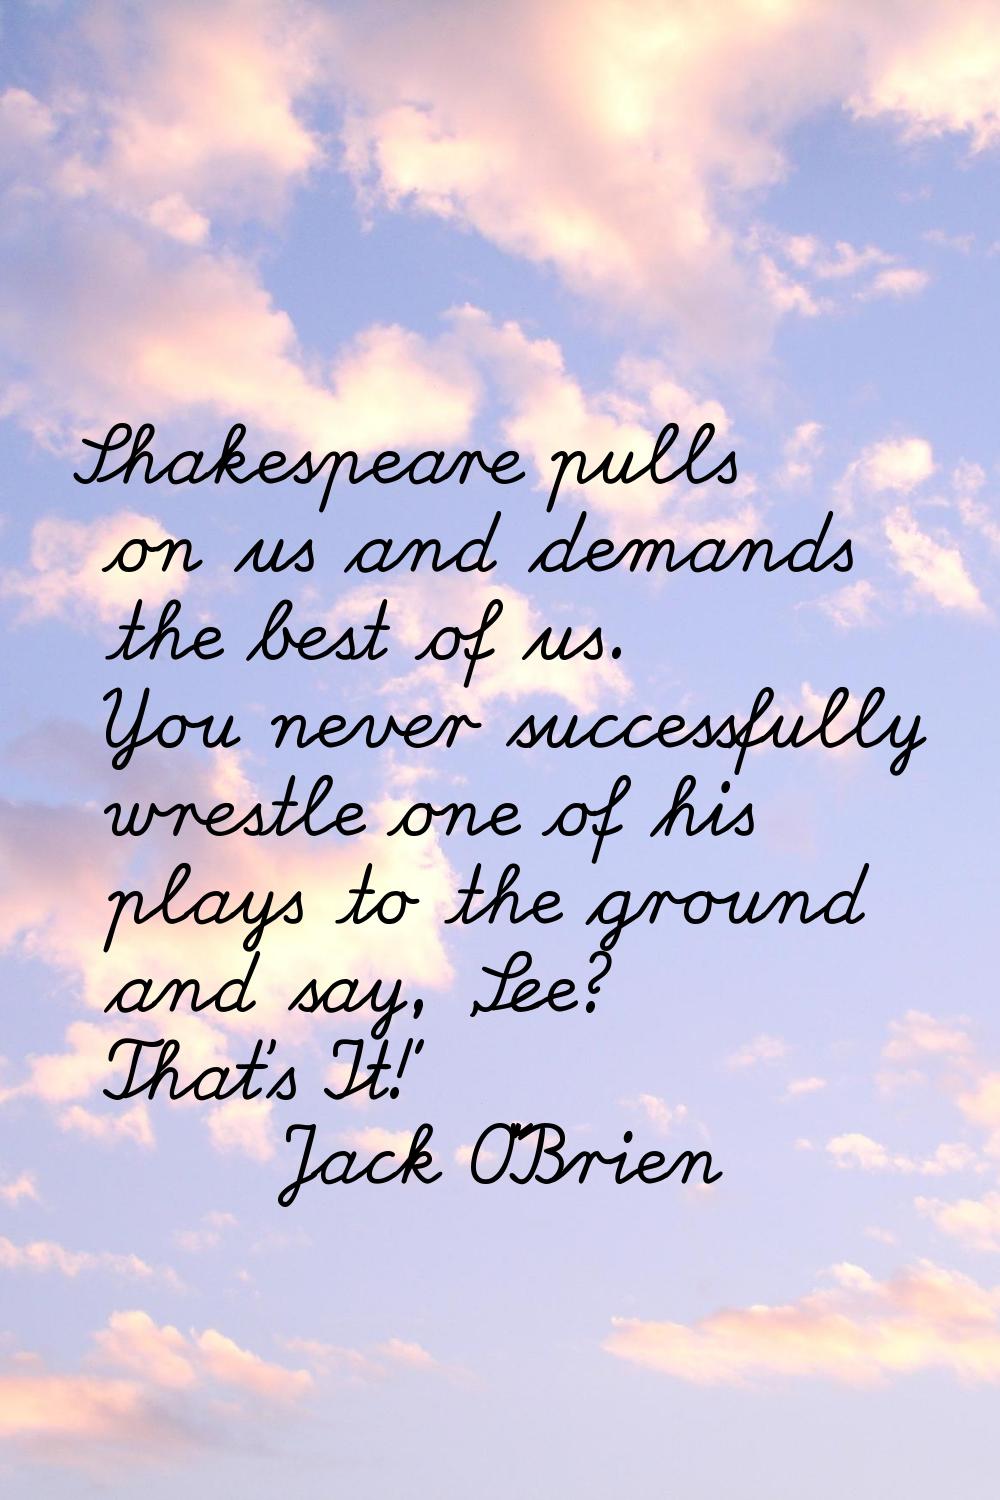 Shakespeare pulls on us and demands the best of us. You never successfully wrestle one of his plays